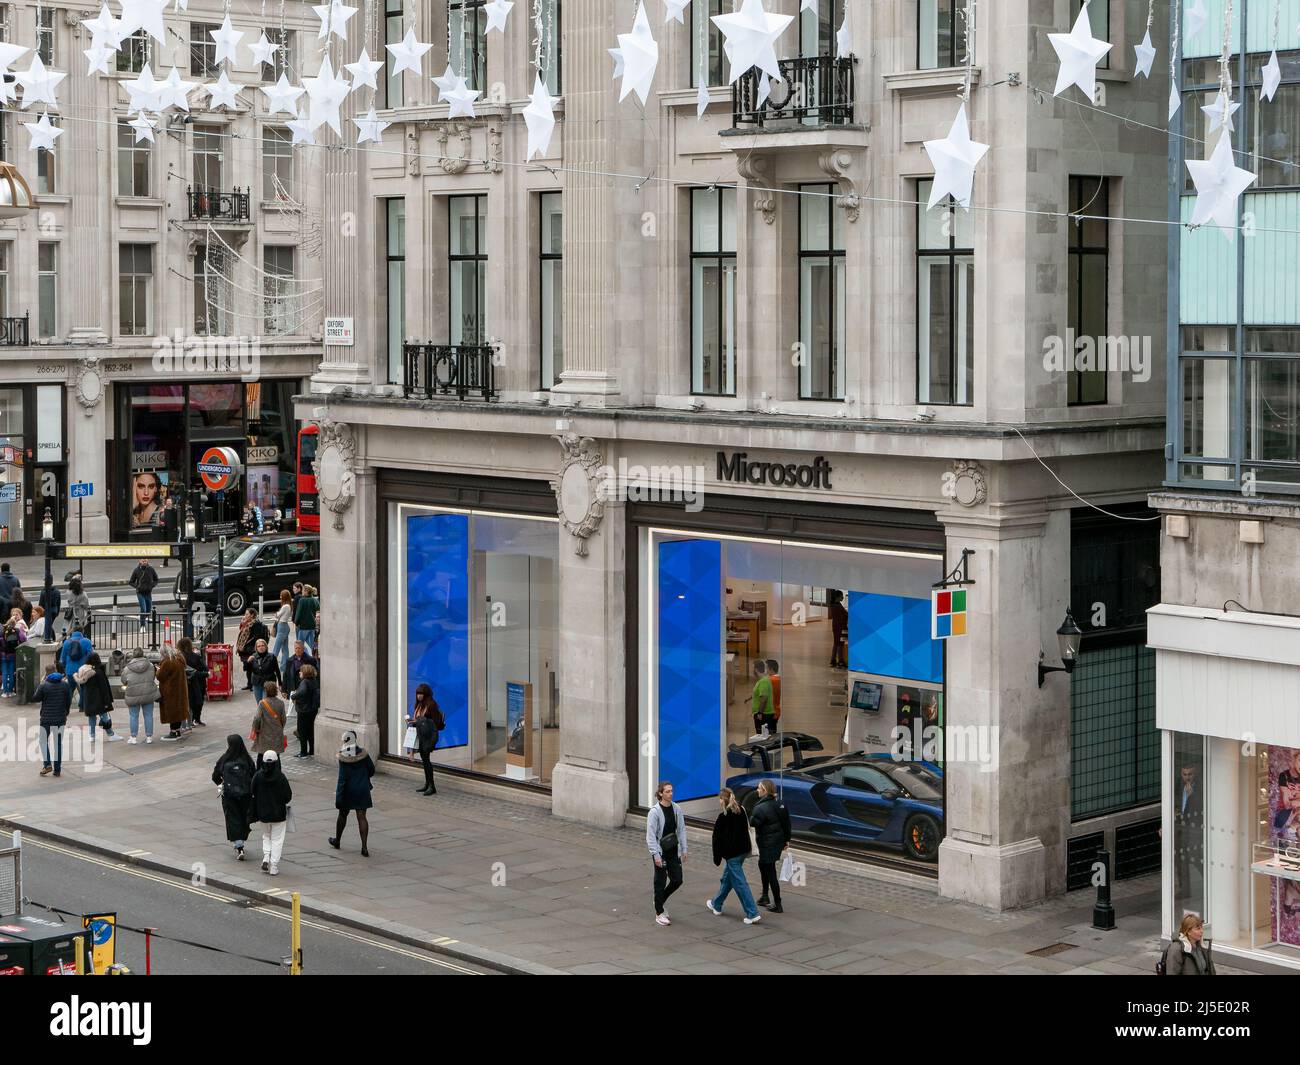 London, UK-27.10.21: Microsoft Store on Oxford Circus in London. One of Four stores that wasn't closed but renovated into 'experience centers' Stock Photo